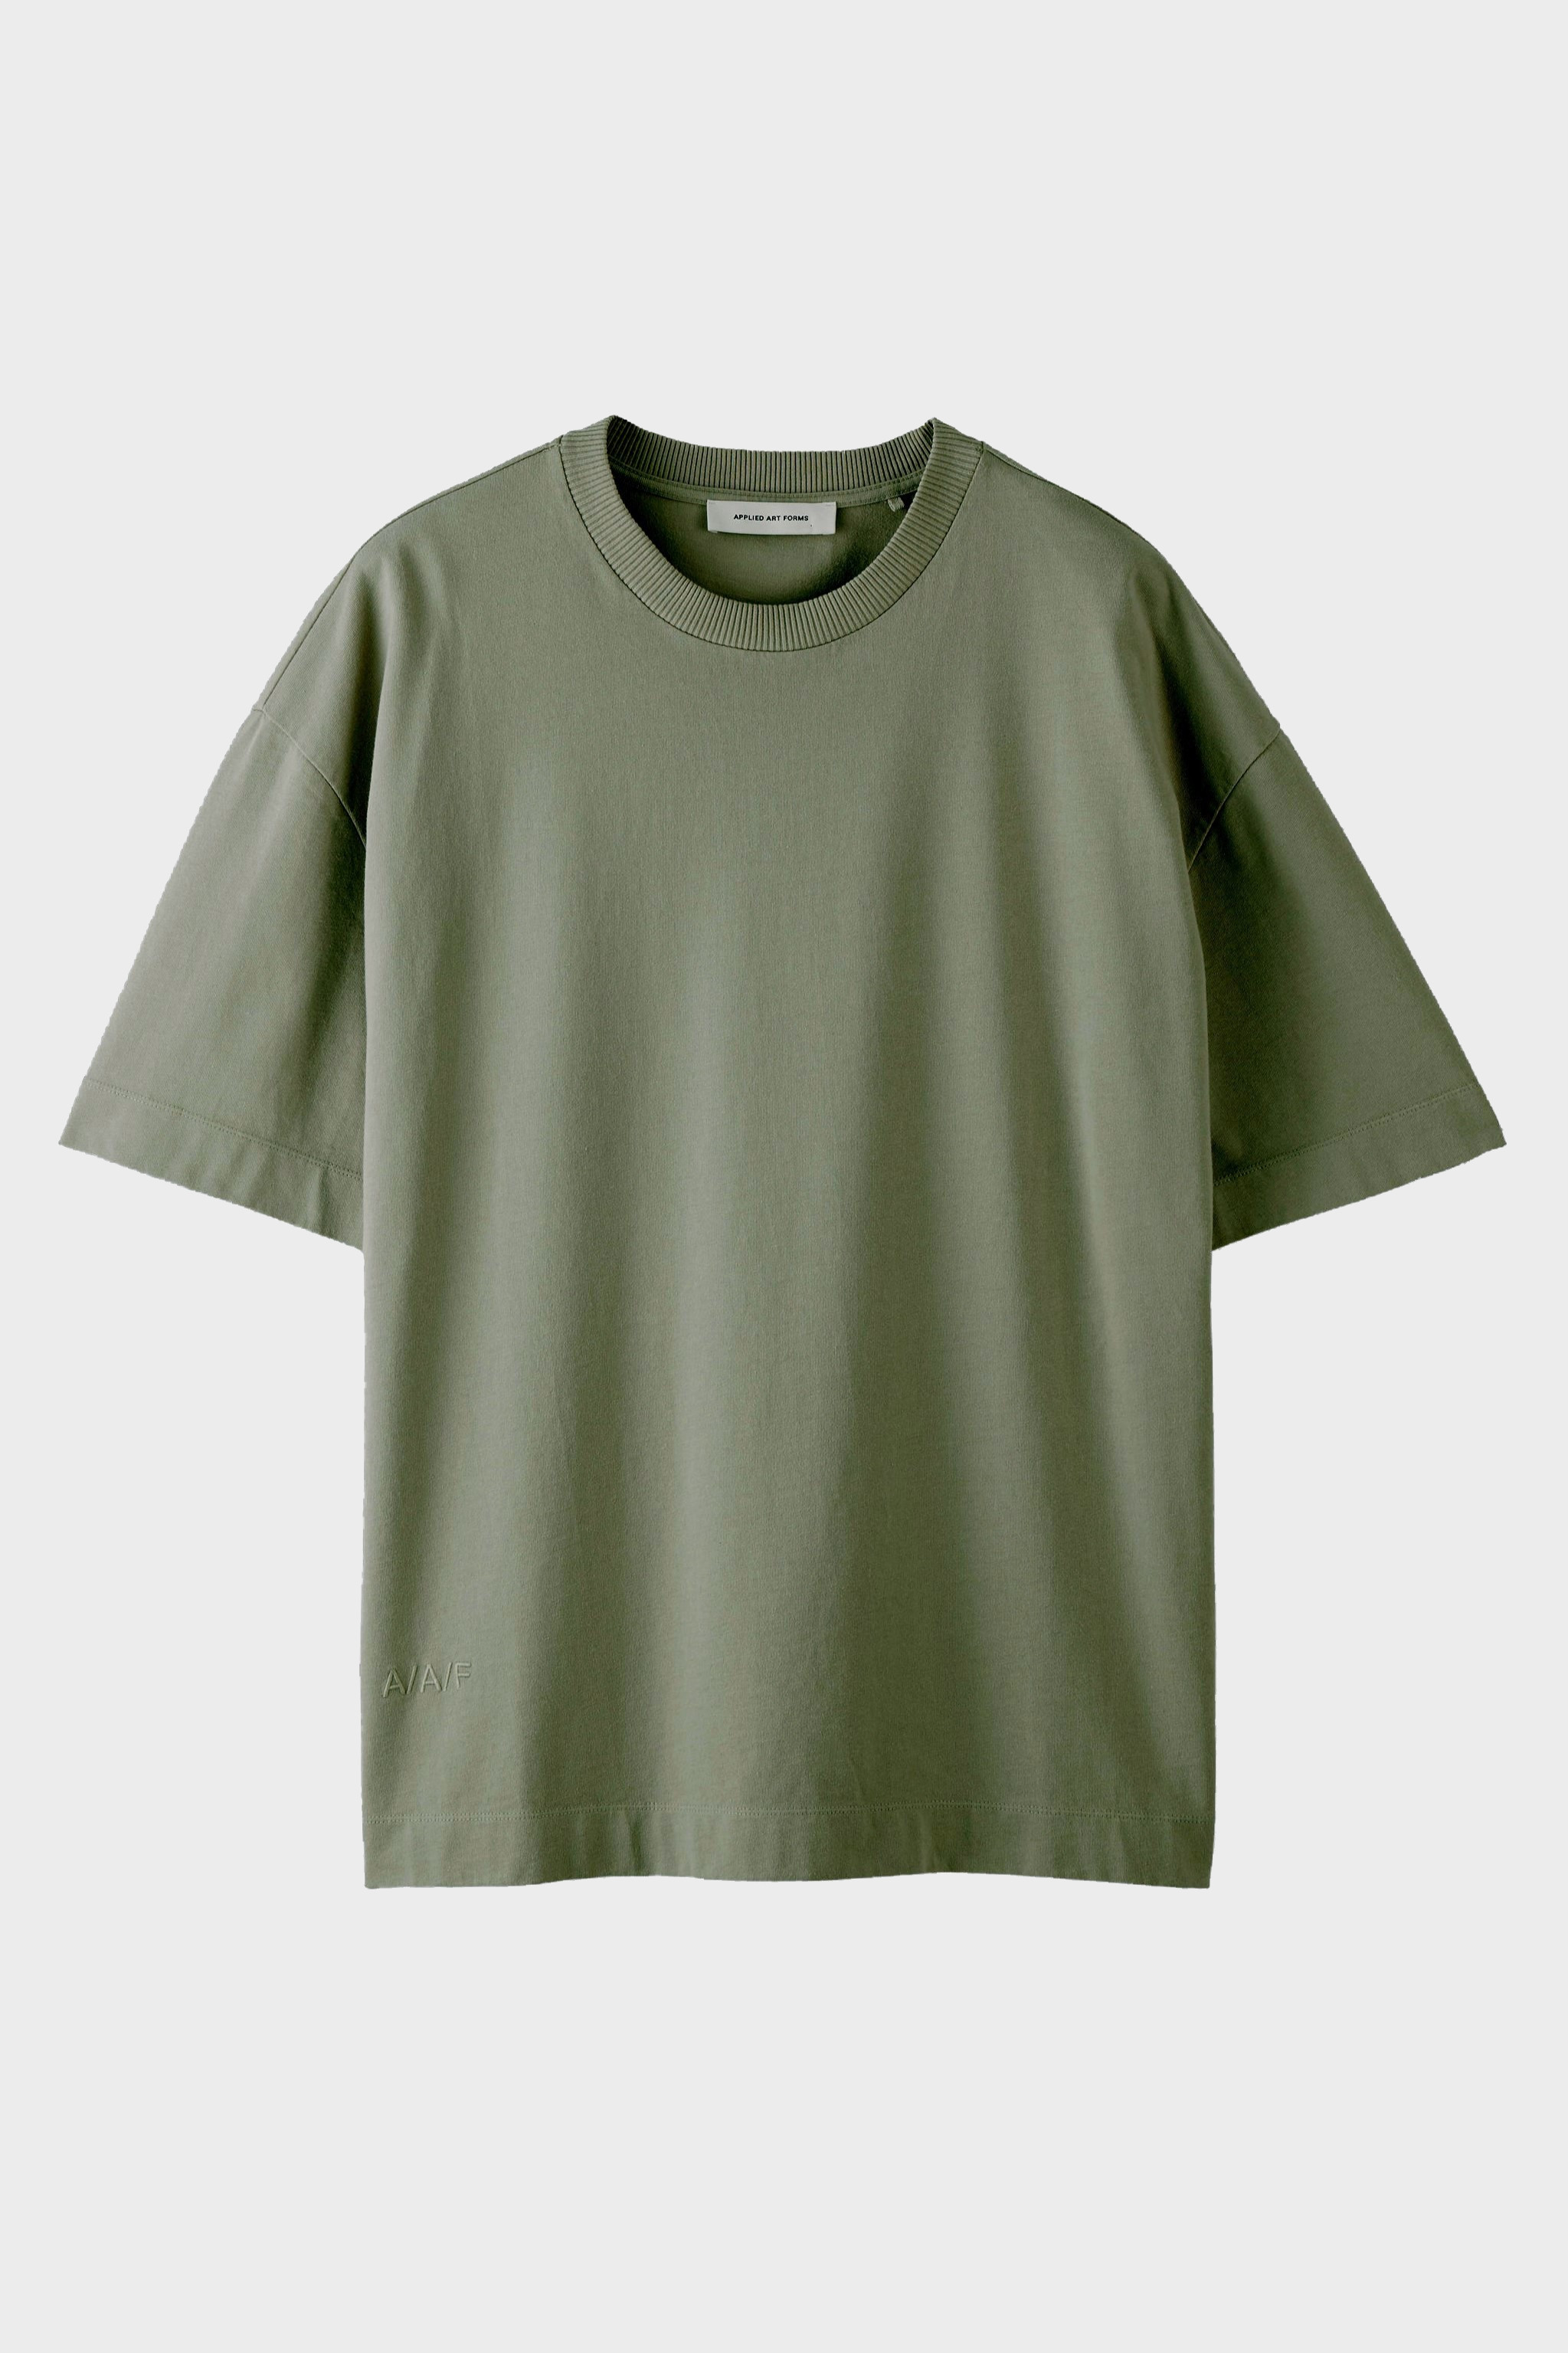 APPLIED ART FORMS Oversize T-Shirt in Dust Green S